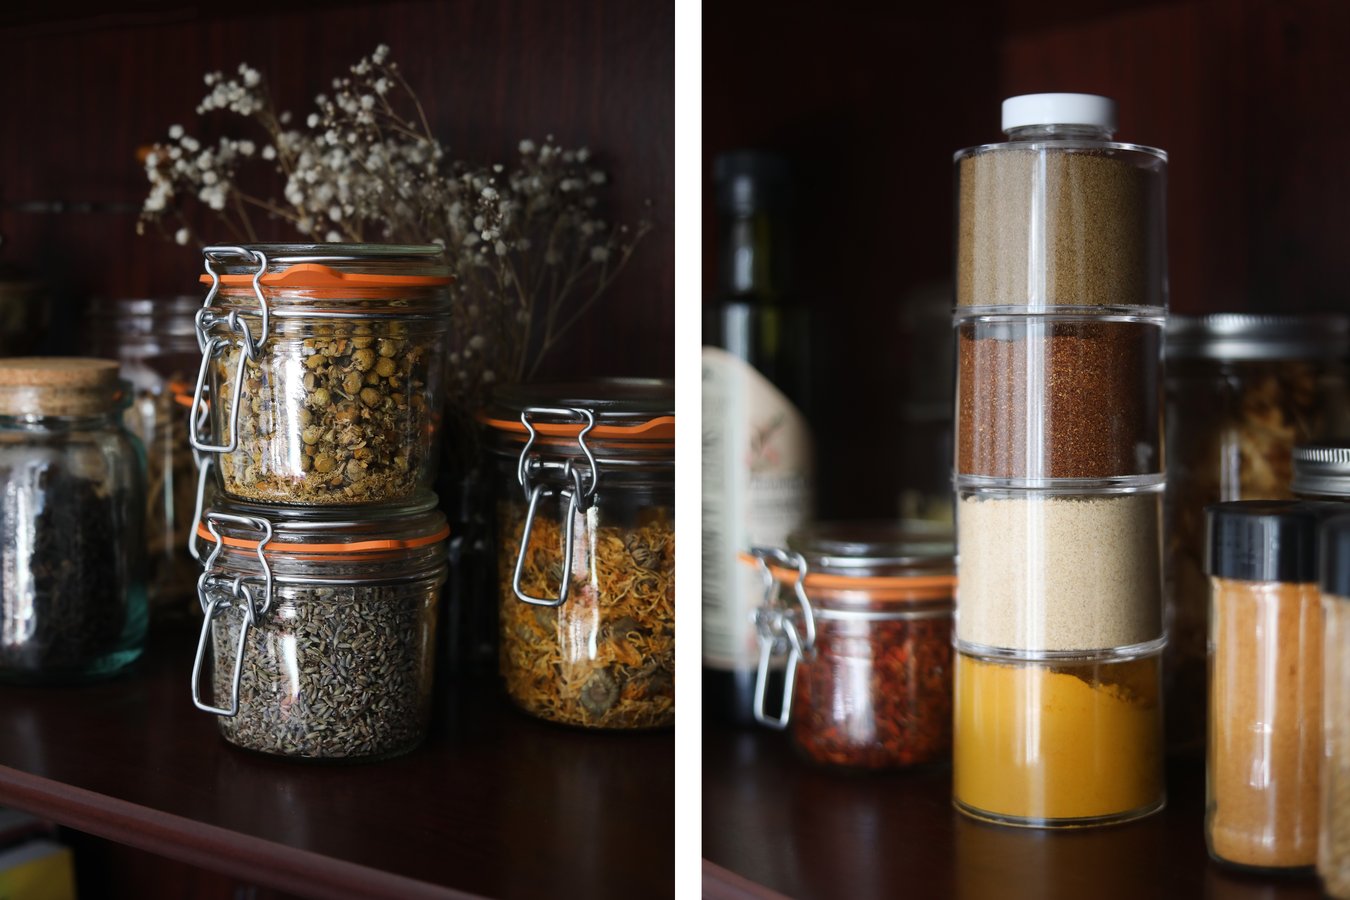 Home apothecary jars full of herbs and spices